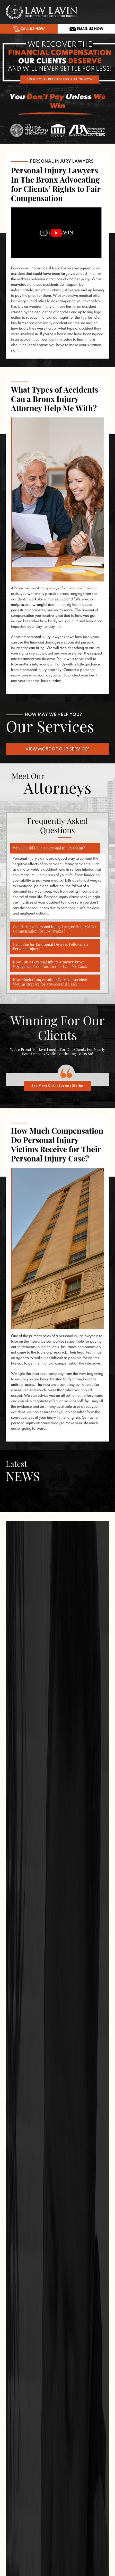 The Law Offices of Thomas J. Lavin - Bronx NY Lawyers